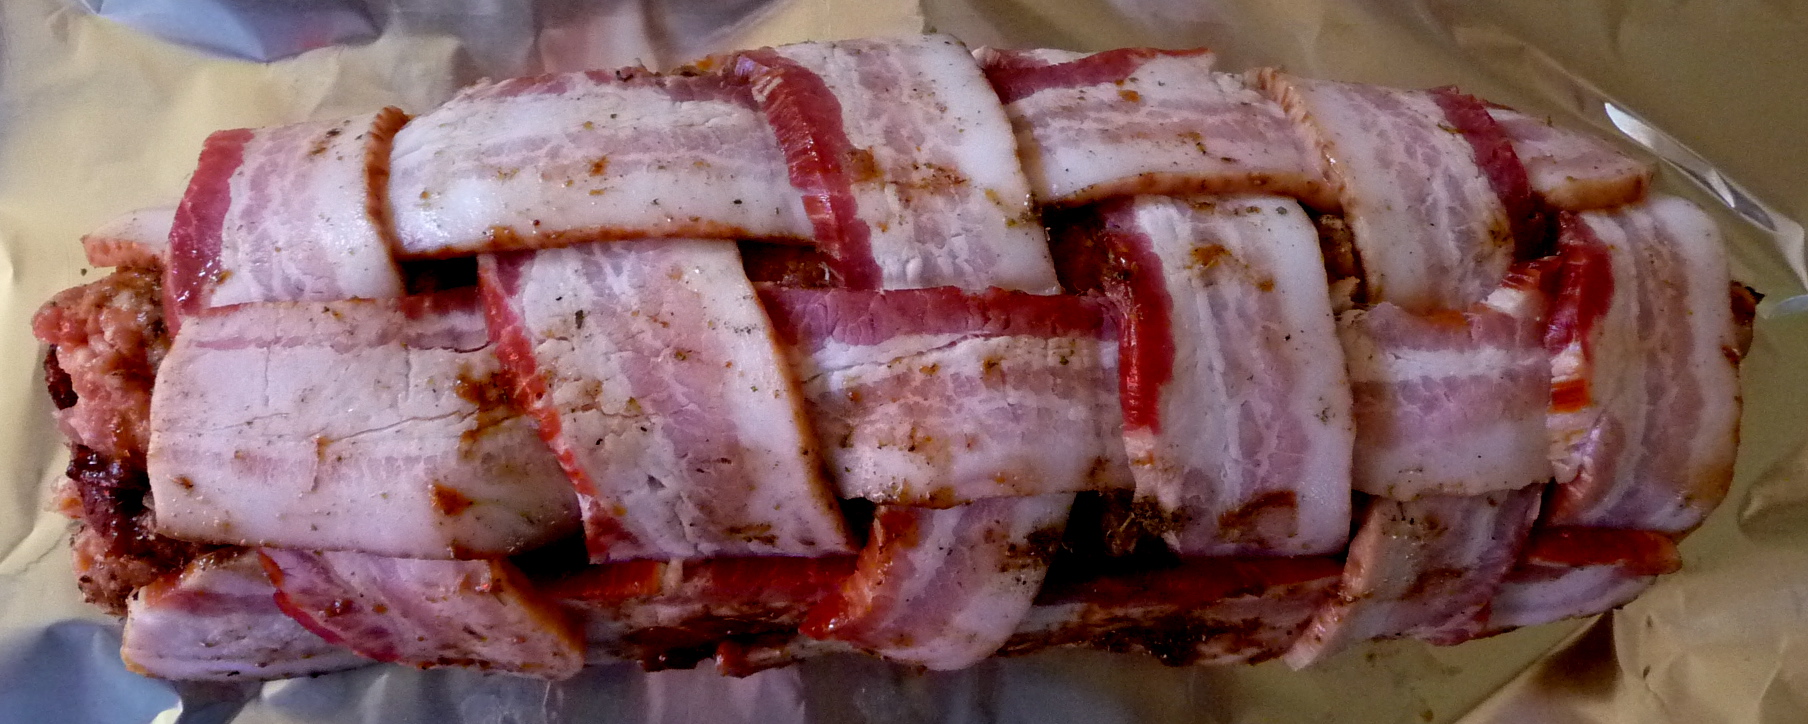 bacon-rolled